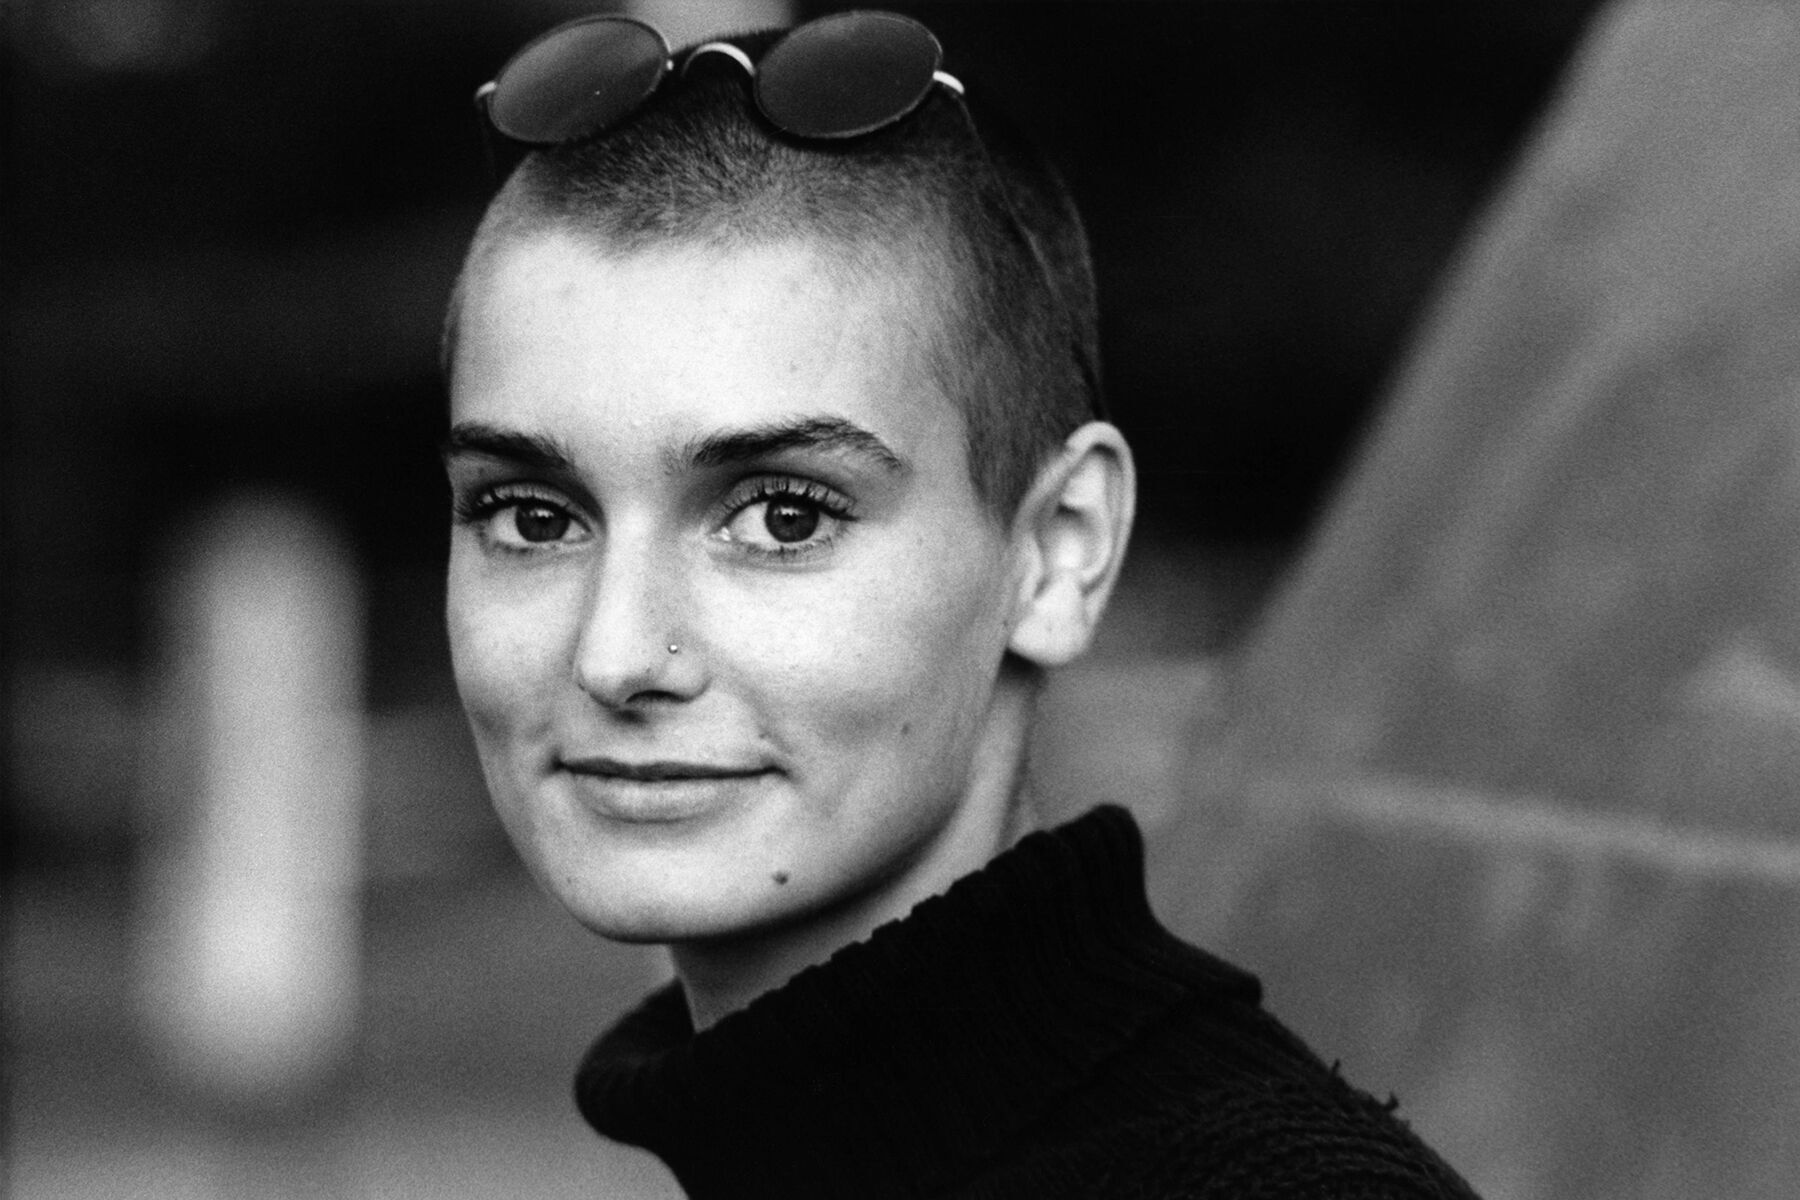 Irish music legend Sinead O'Connor has died: what she is remembered for. Photo and video